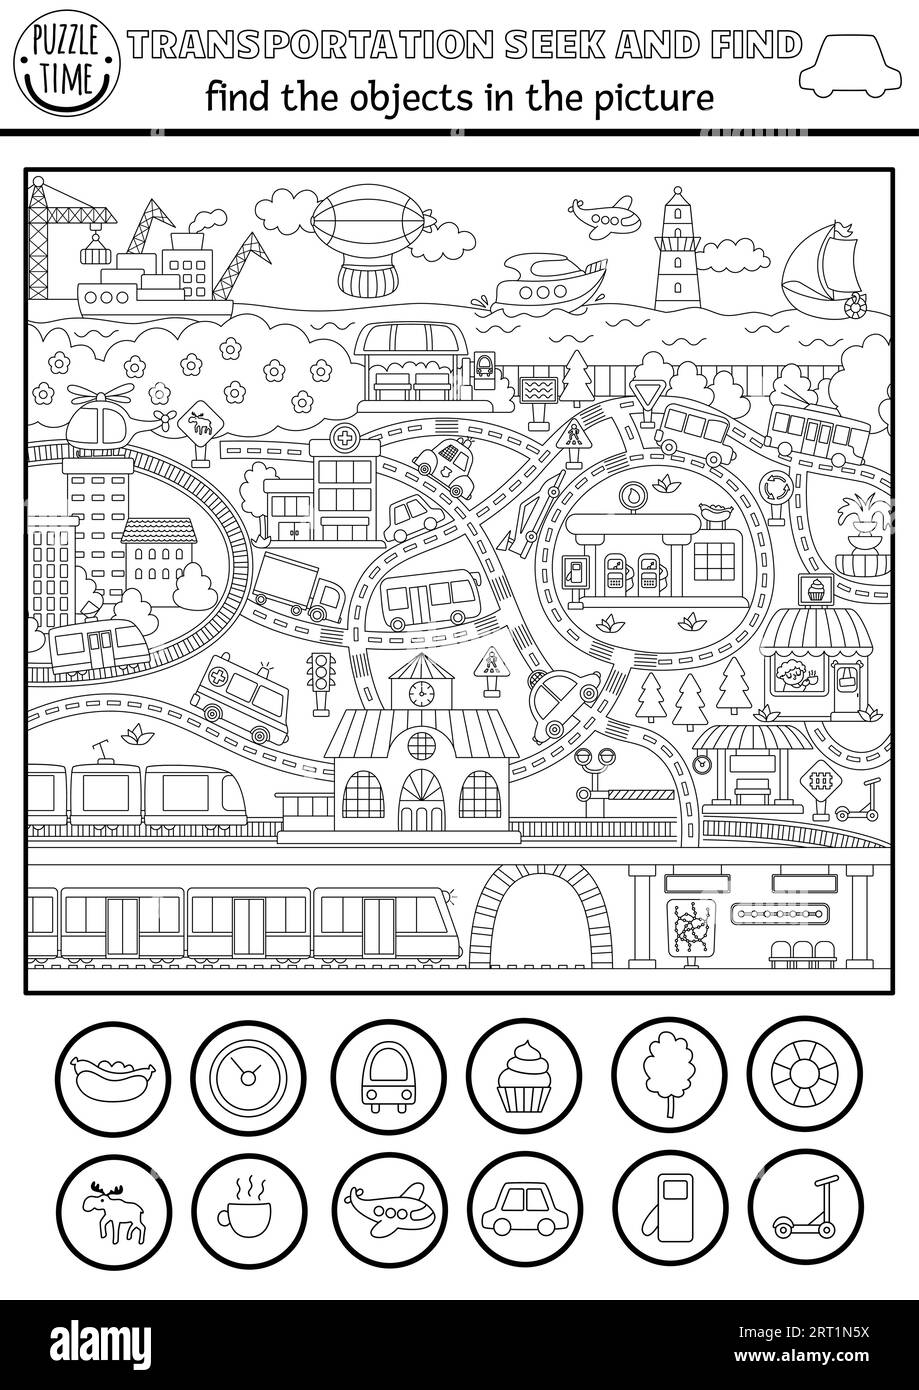 Vector transportation searching black and white game with city landscape with roads cars metro spot hidden objects coloring page water air land stock vector image art